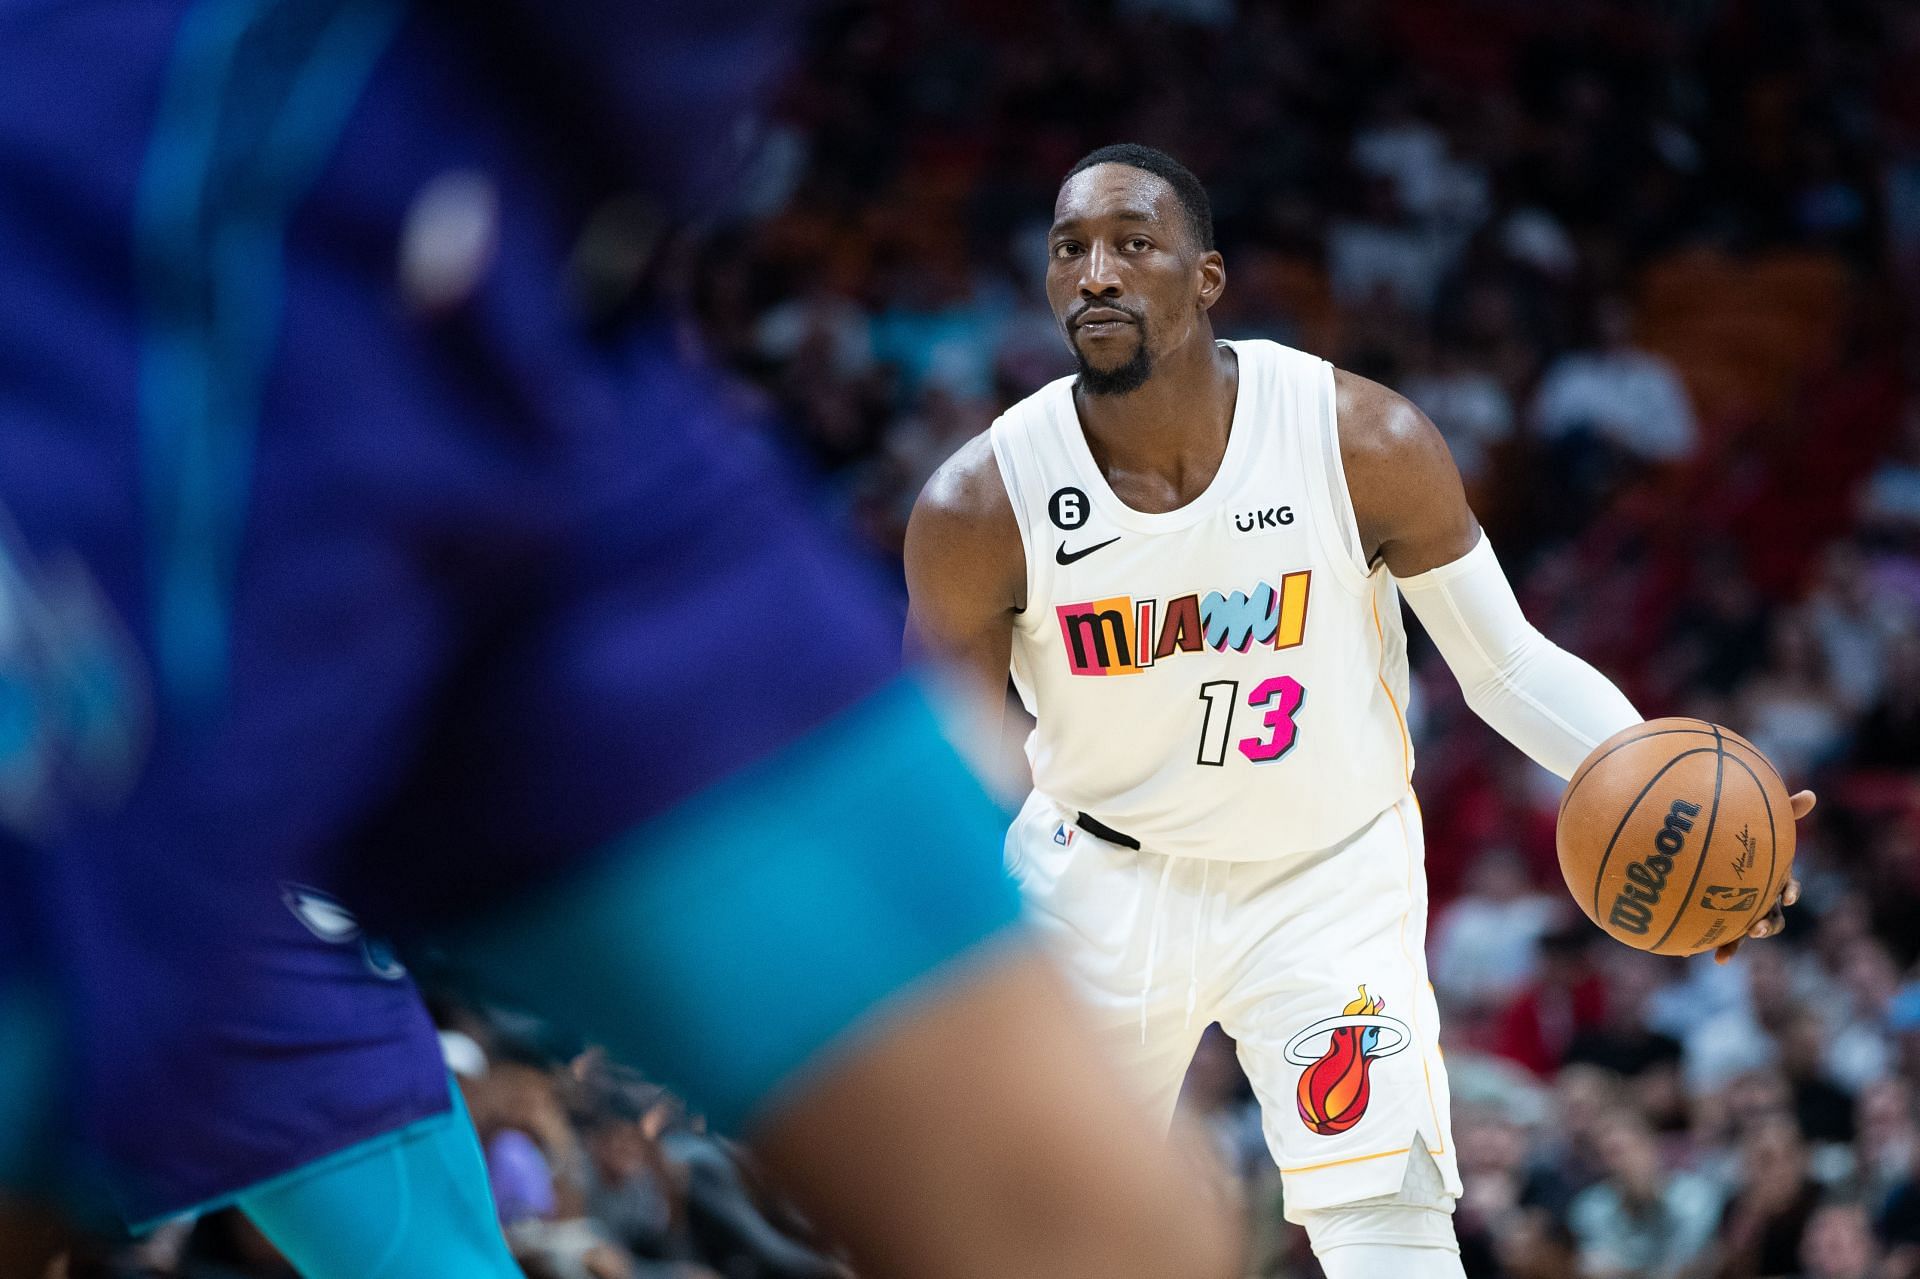 Bam Adebayo is dealing with a left knee contusion.